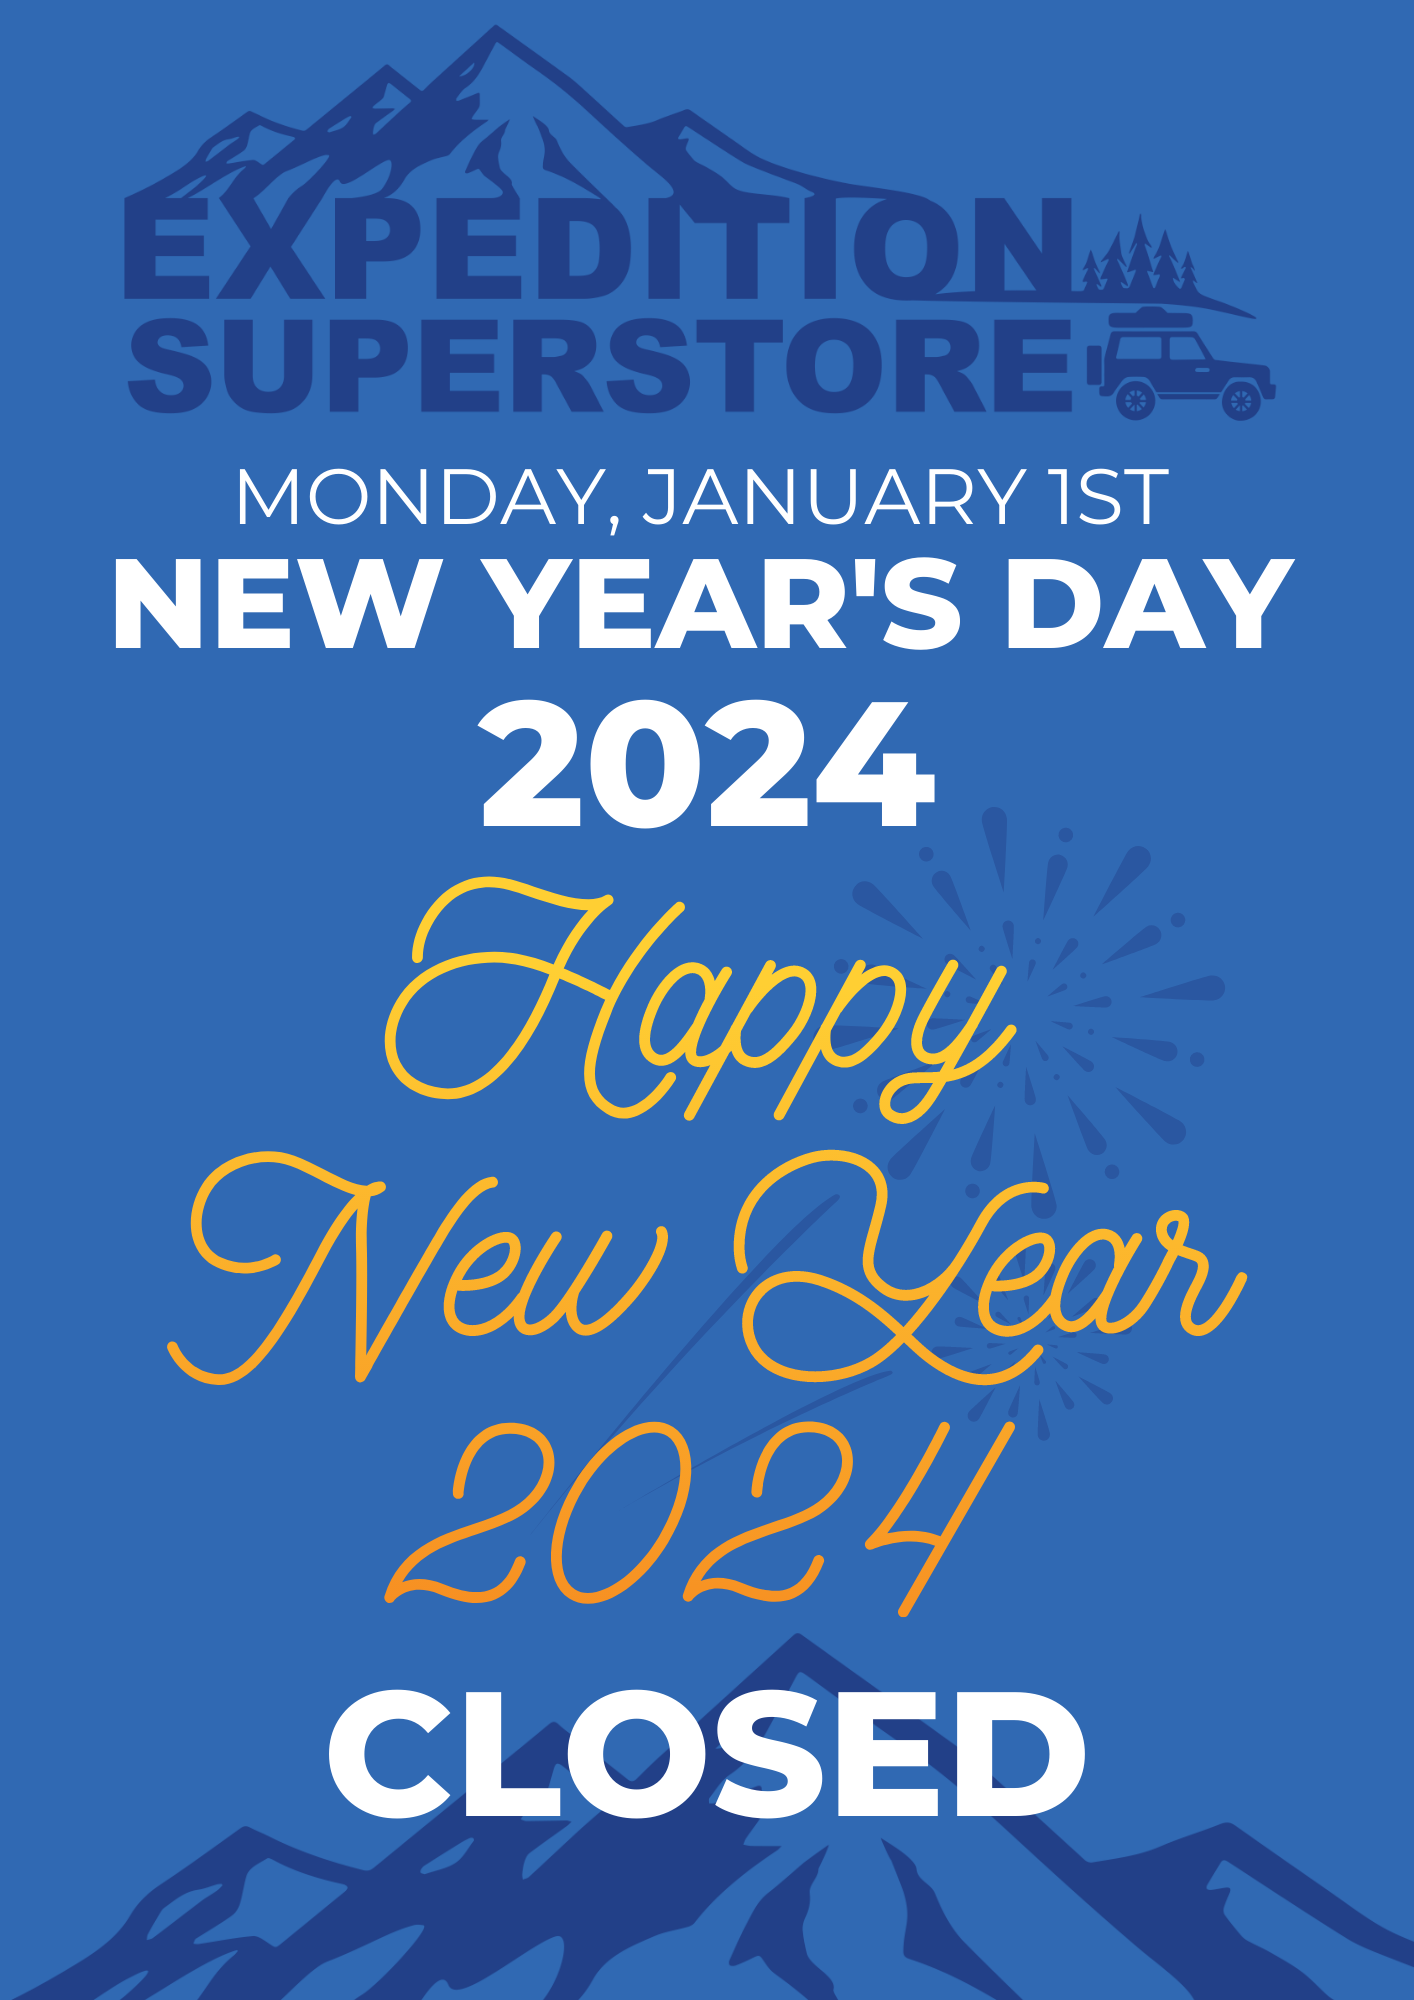 closed-new-year-s-day-2024-expedition-superstore